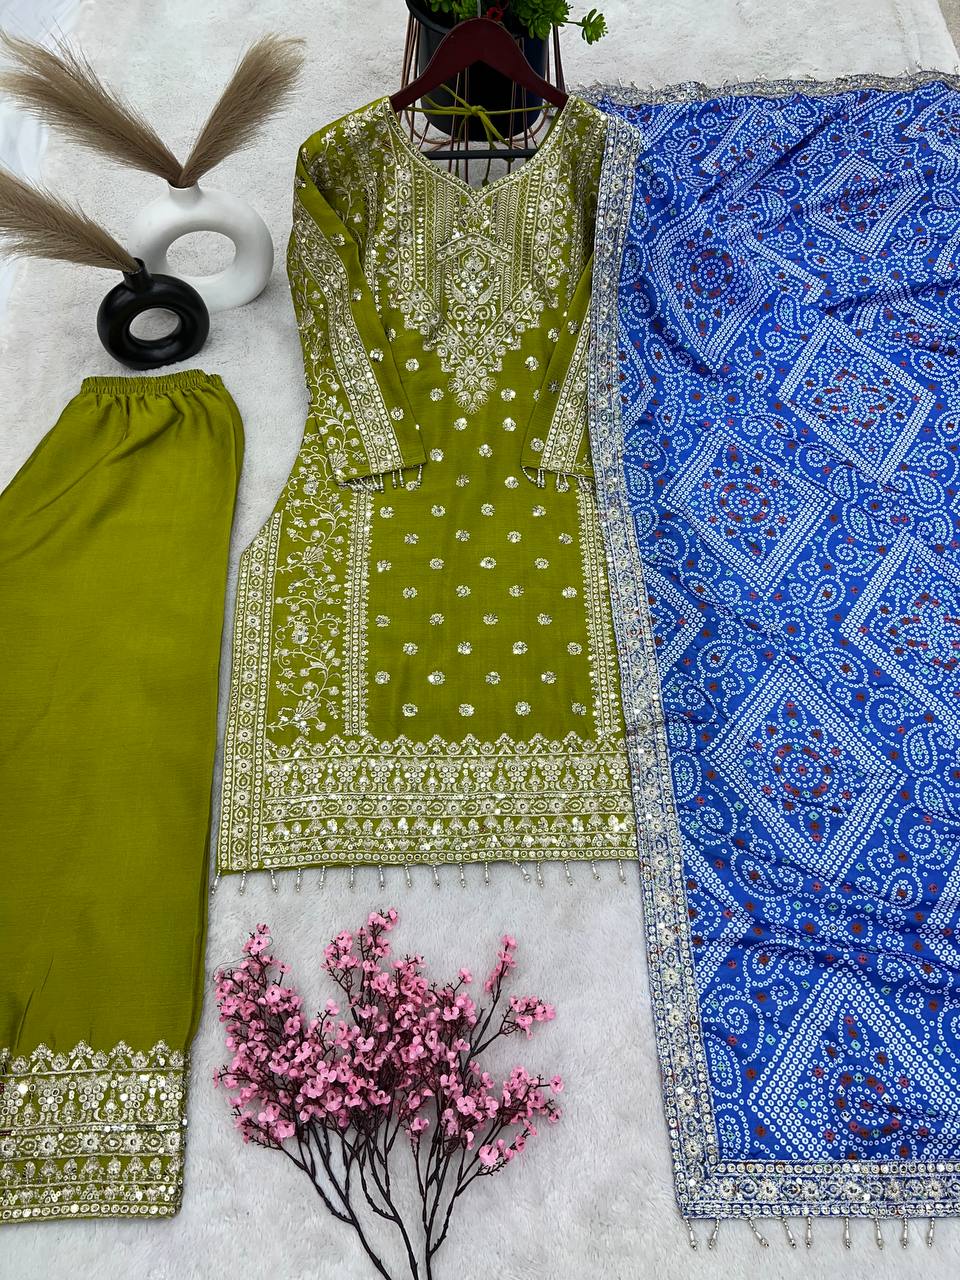 Admiring Parrot Green Salwar Suit With Heavy Work